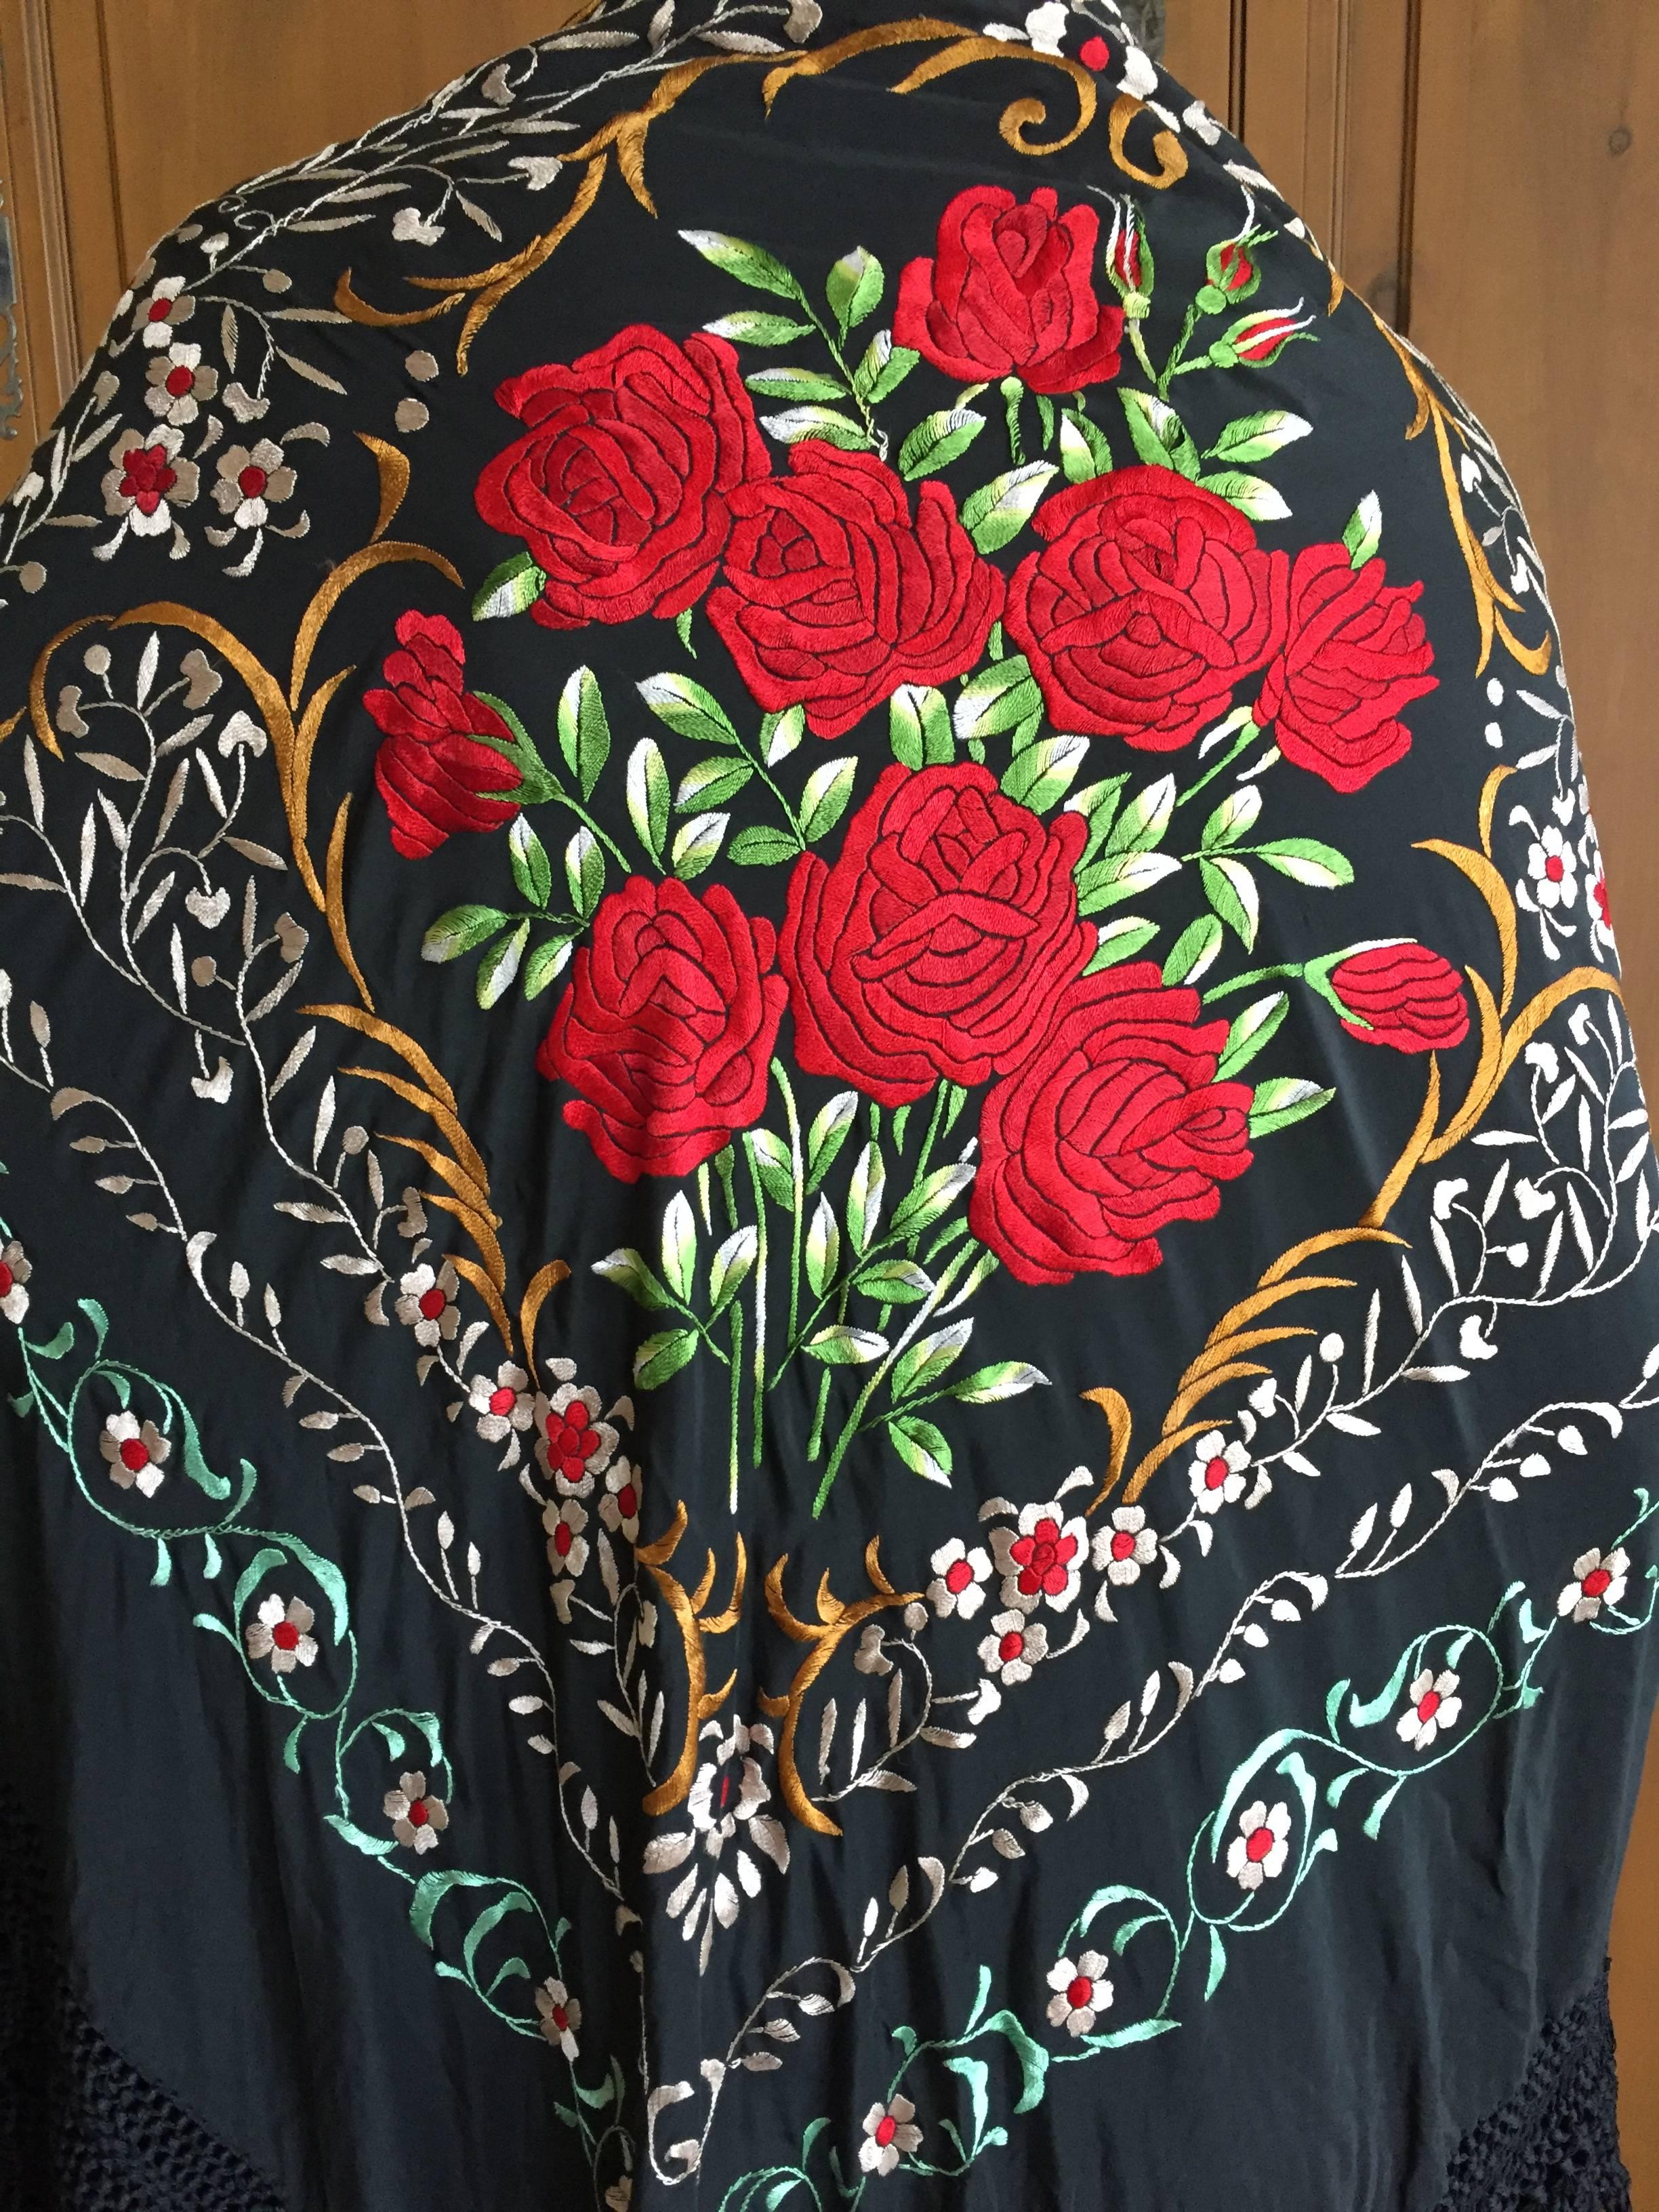 Beautiful large black antique piano shawl embroidered with beautiful red roses with long fringe.
